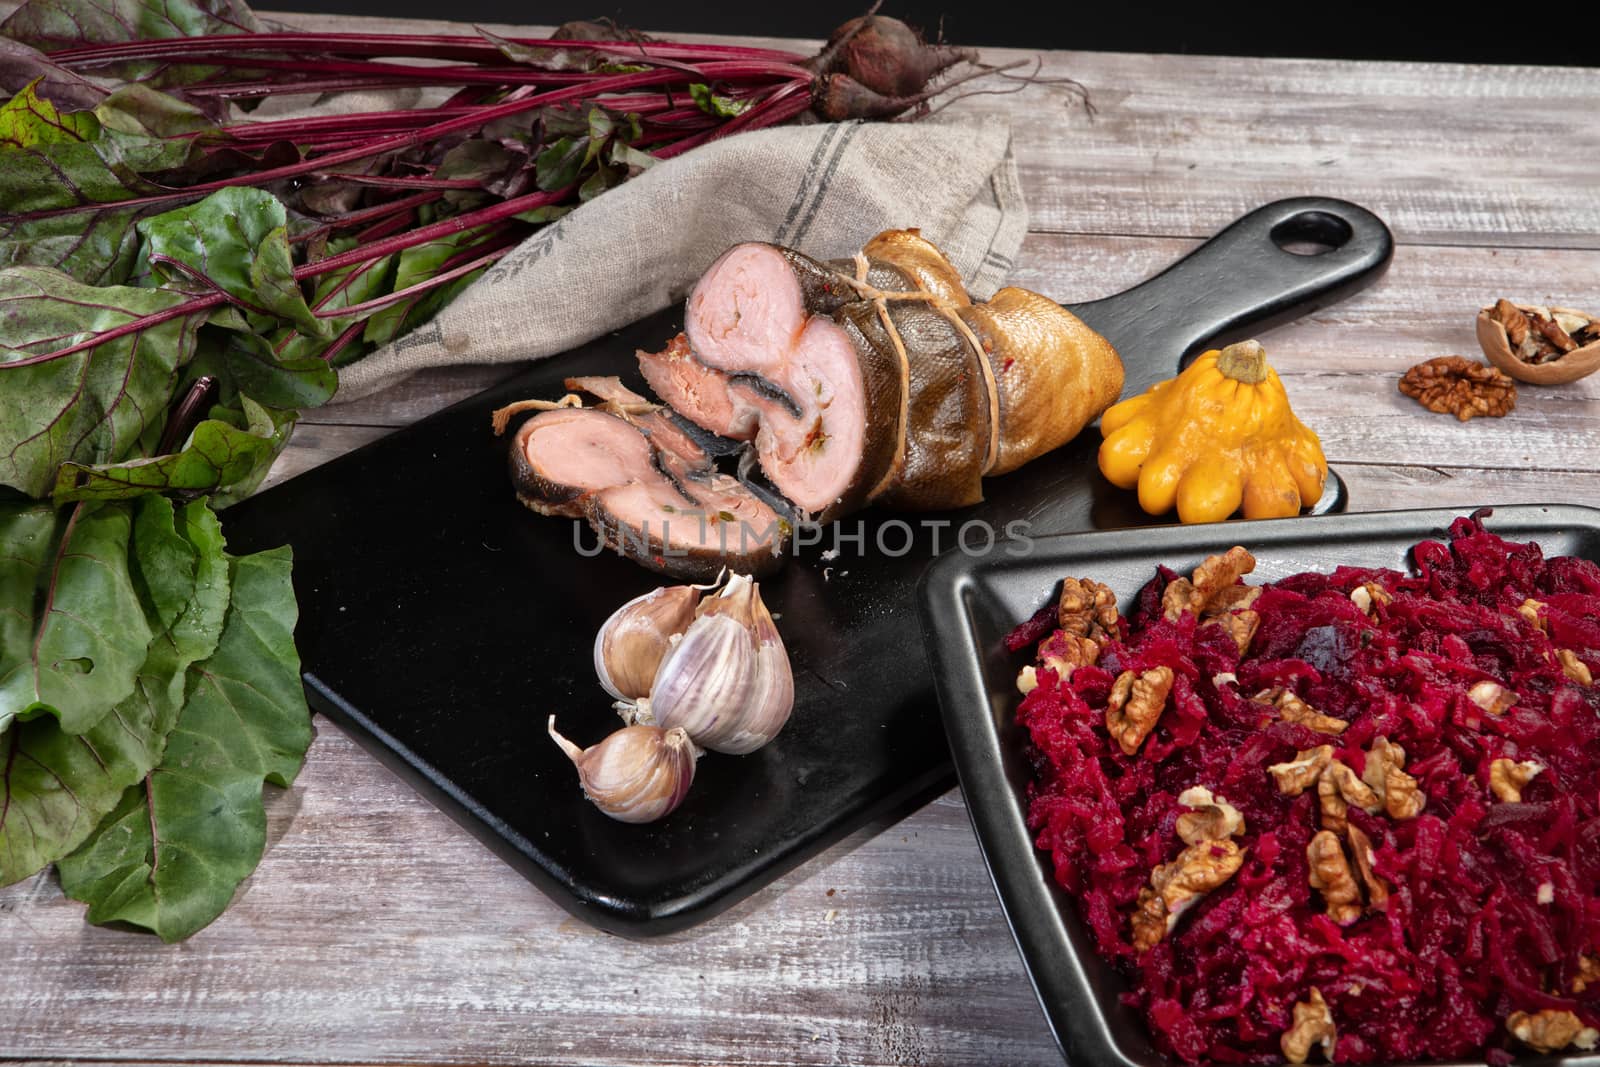 Meat And Vegetables by Fotoskat